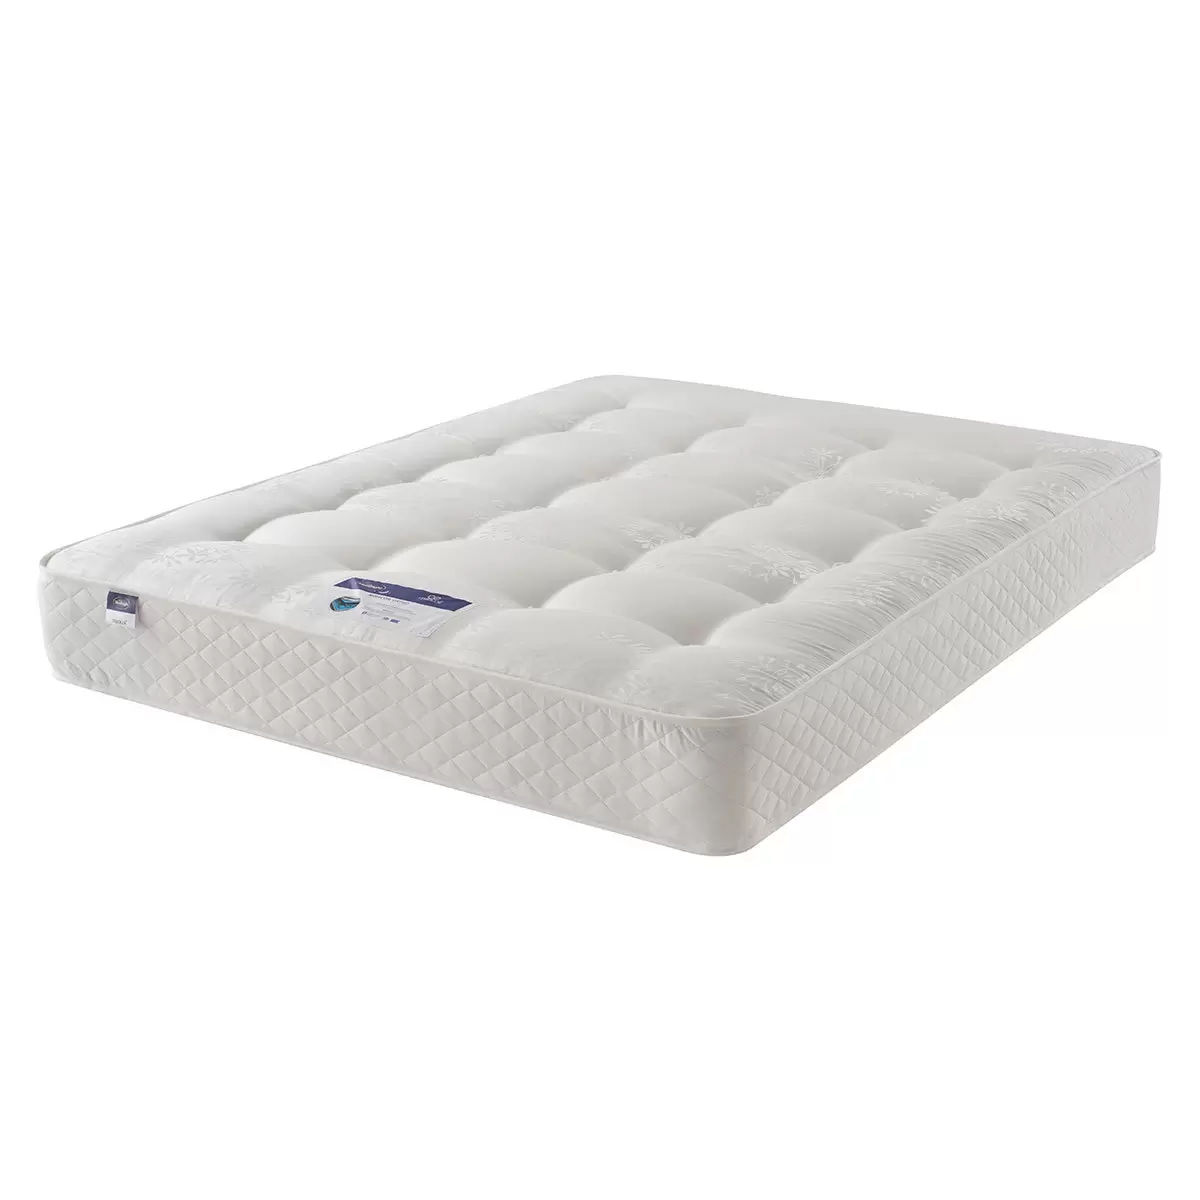 Silentnight Bexley Eco Miracoil Ortho Mattress & Divan Set in Grey in 4 Sizes